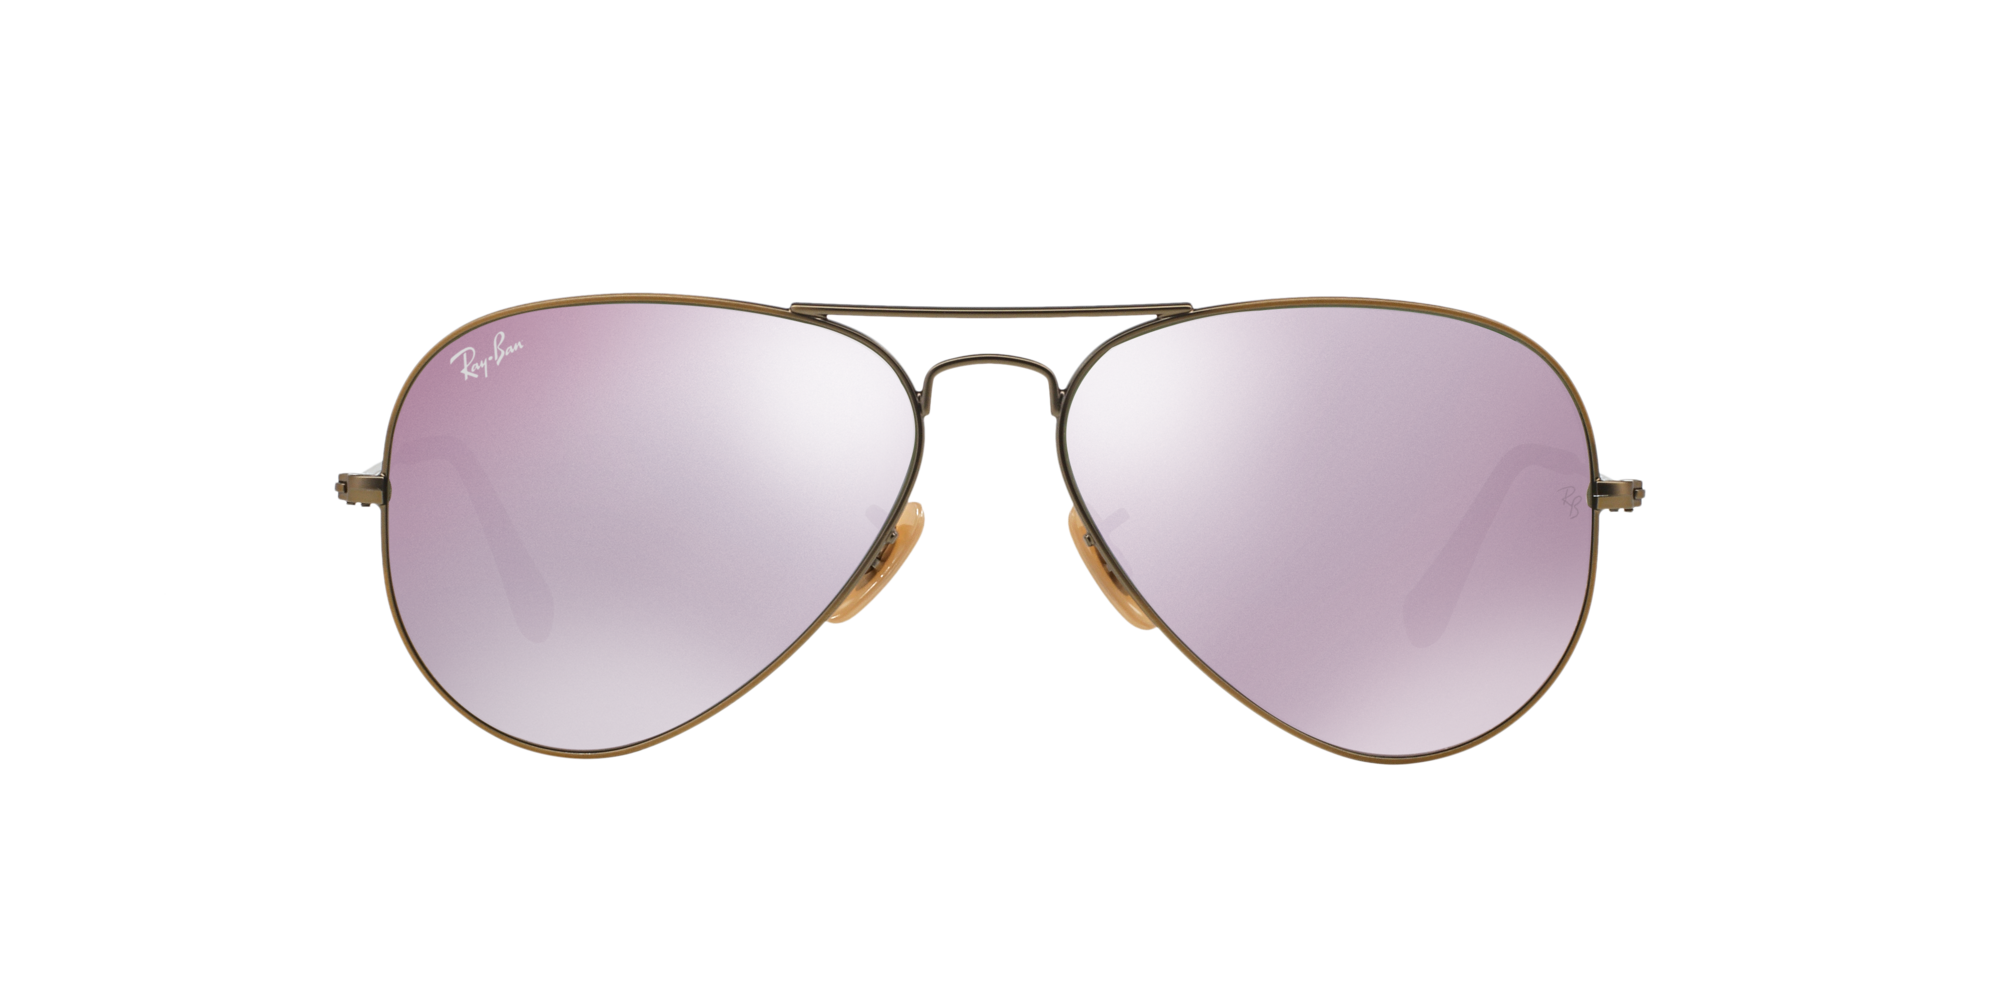 Ray Ban RB3025 167/4K 58M Demiglos Brushed Bronze/Lilac Mirror Aviator